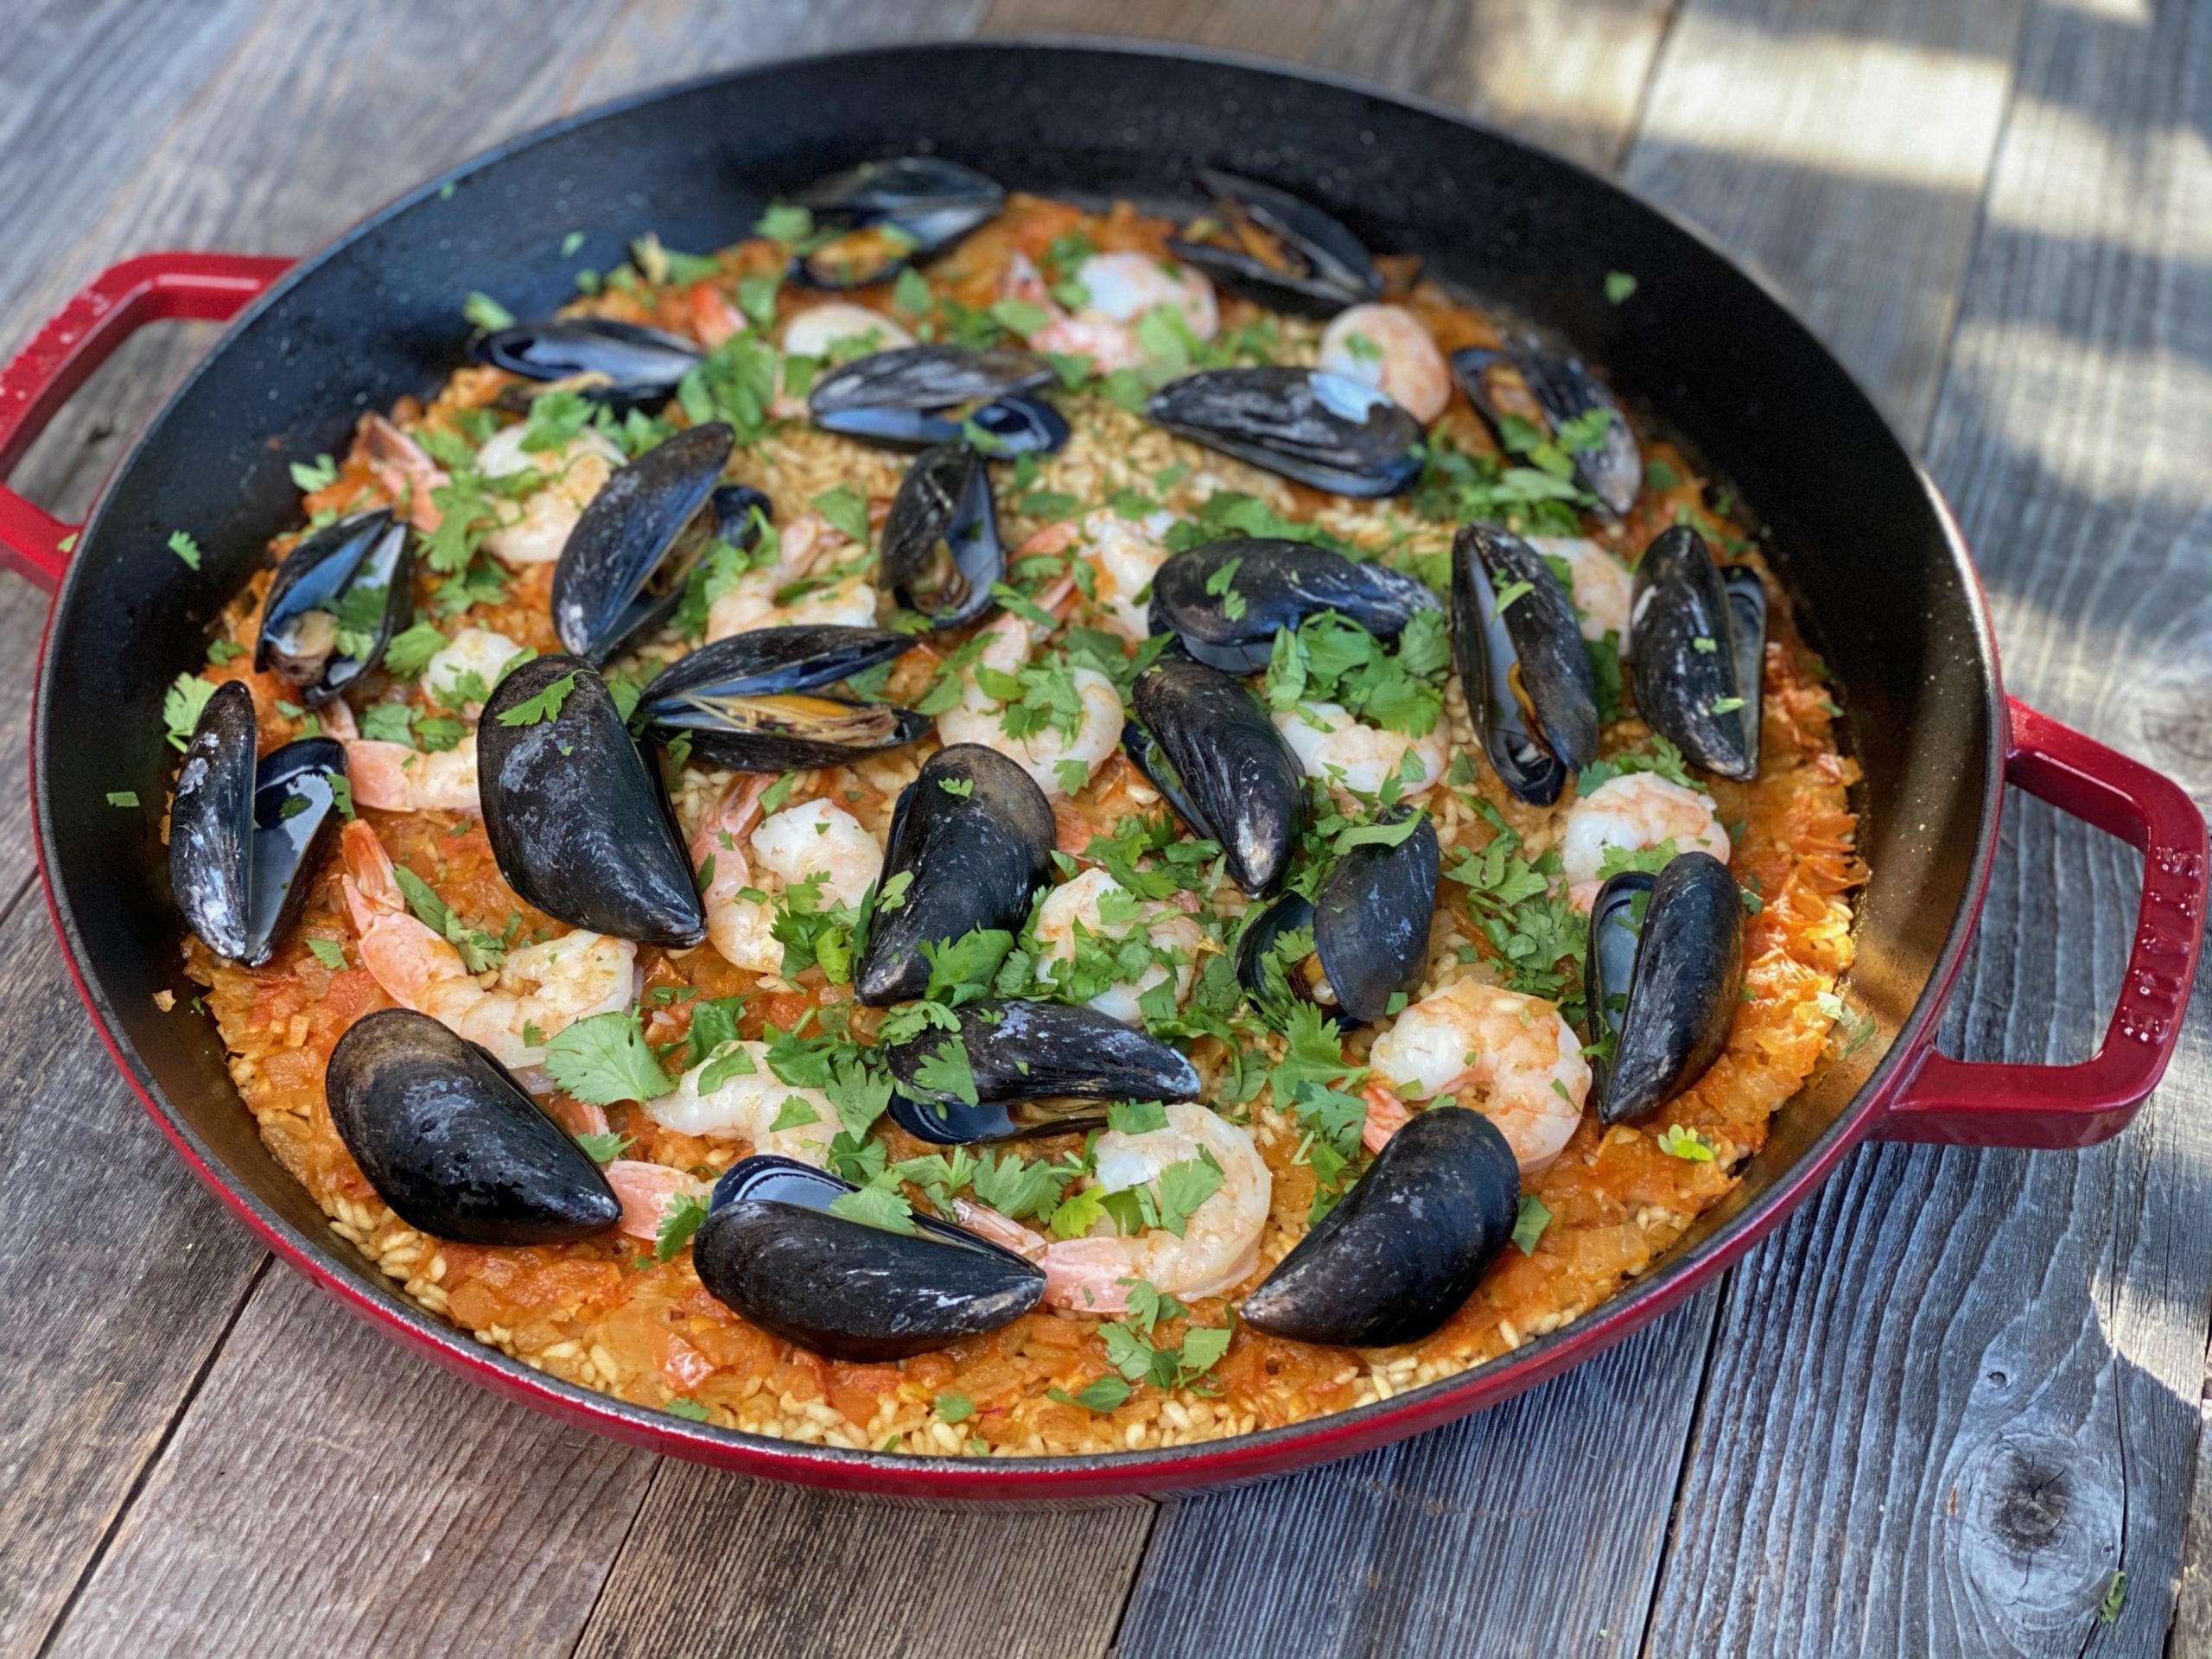 https://lifeatthetable.com/wp-content/uploads/2021/01/Life-At-The-Table-Paella-Live-Virtual-Cooking-Class-scaled.jpeg